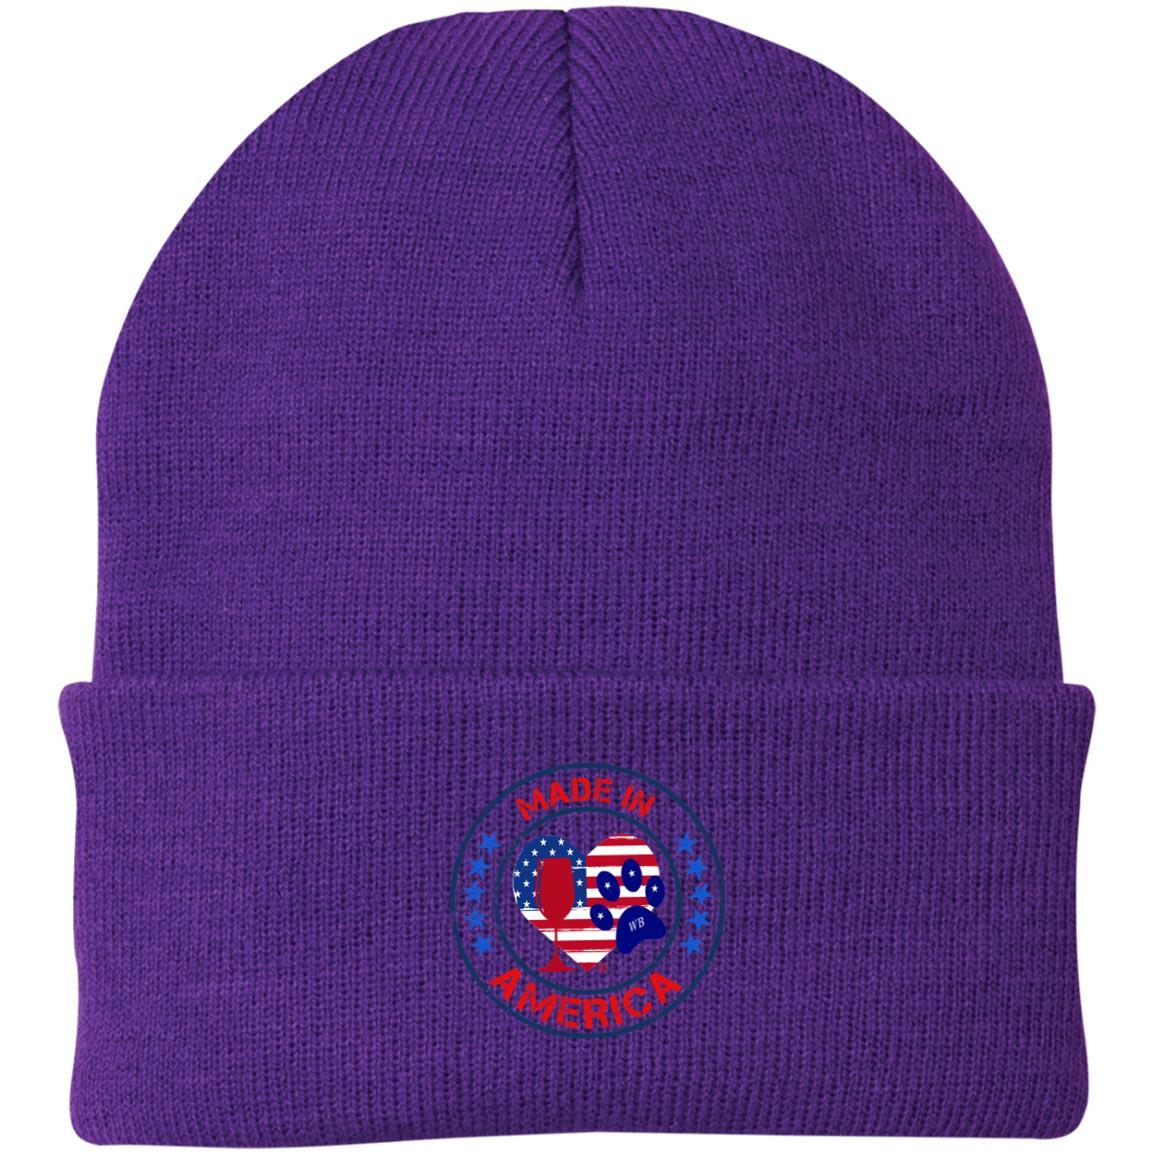 Hats Athletic Purple / One Size Winey Bitches Co "Made In America" Embroidered Knit Cap WineyBitchesCo